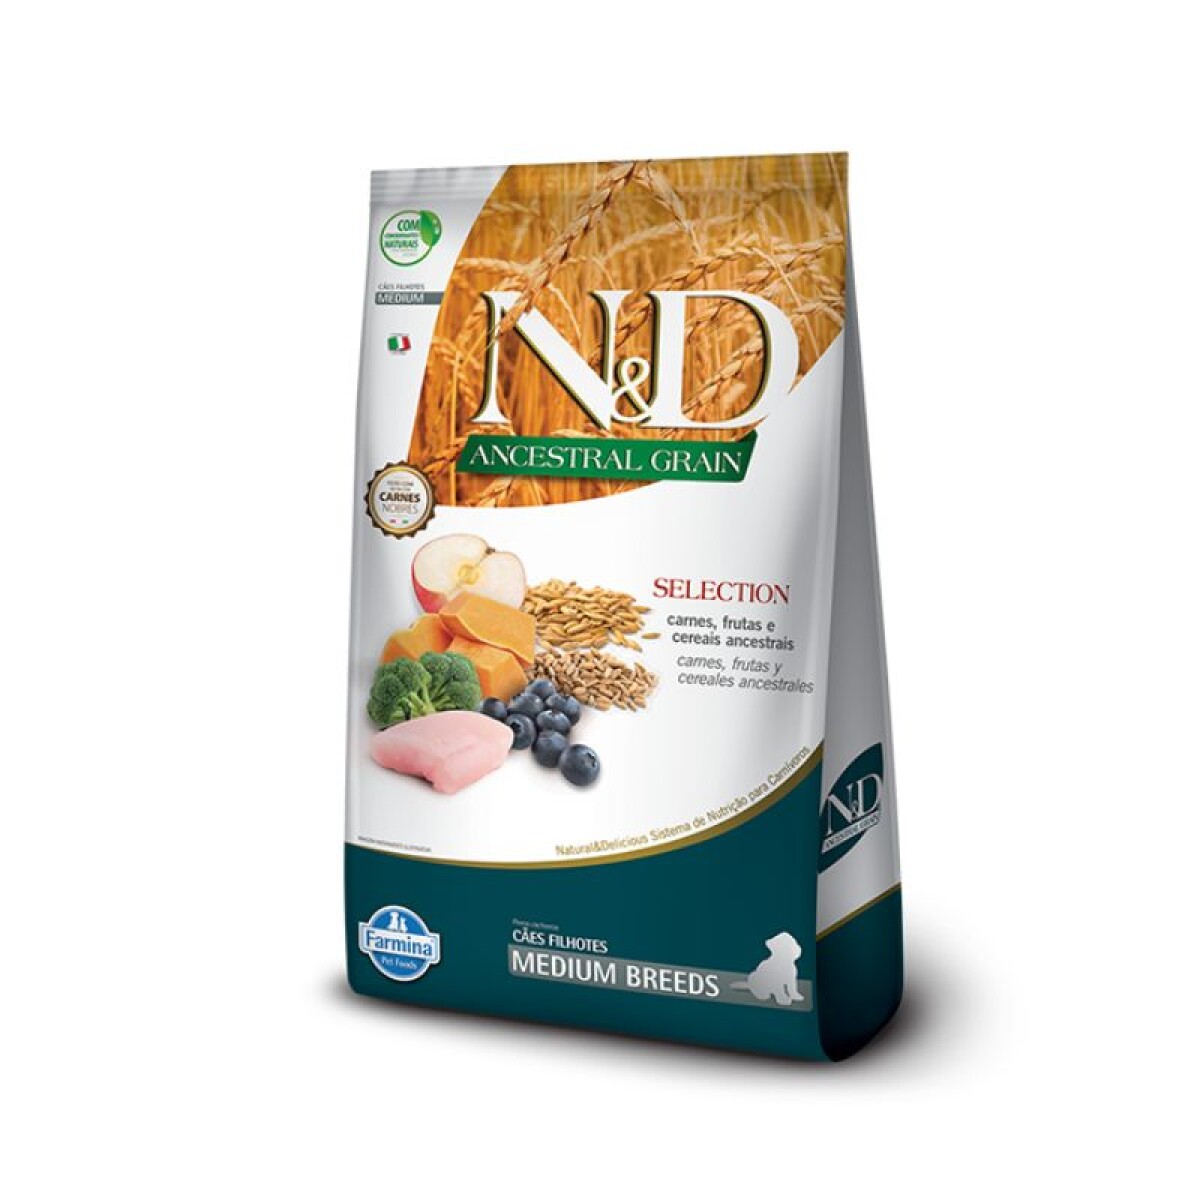 ND ANCESTRAL CAN PUPPY MEDIANO 15 KG - Nd Ancestral Can Puppy Mediano 15 Kg 